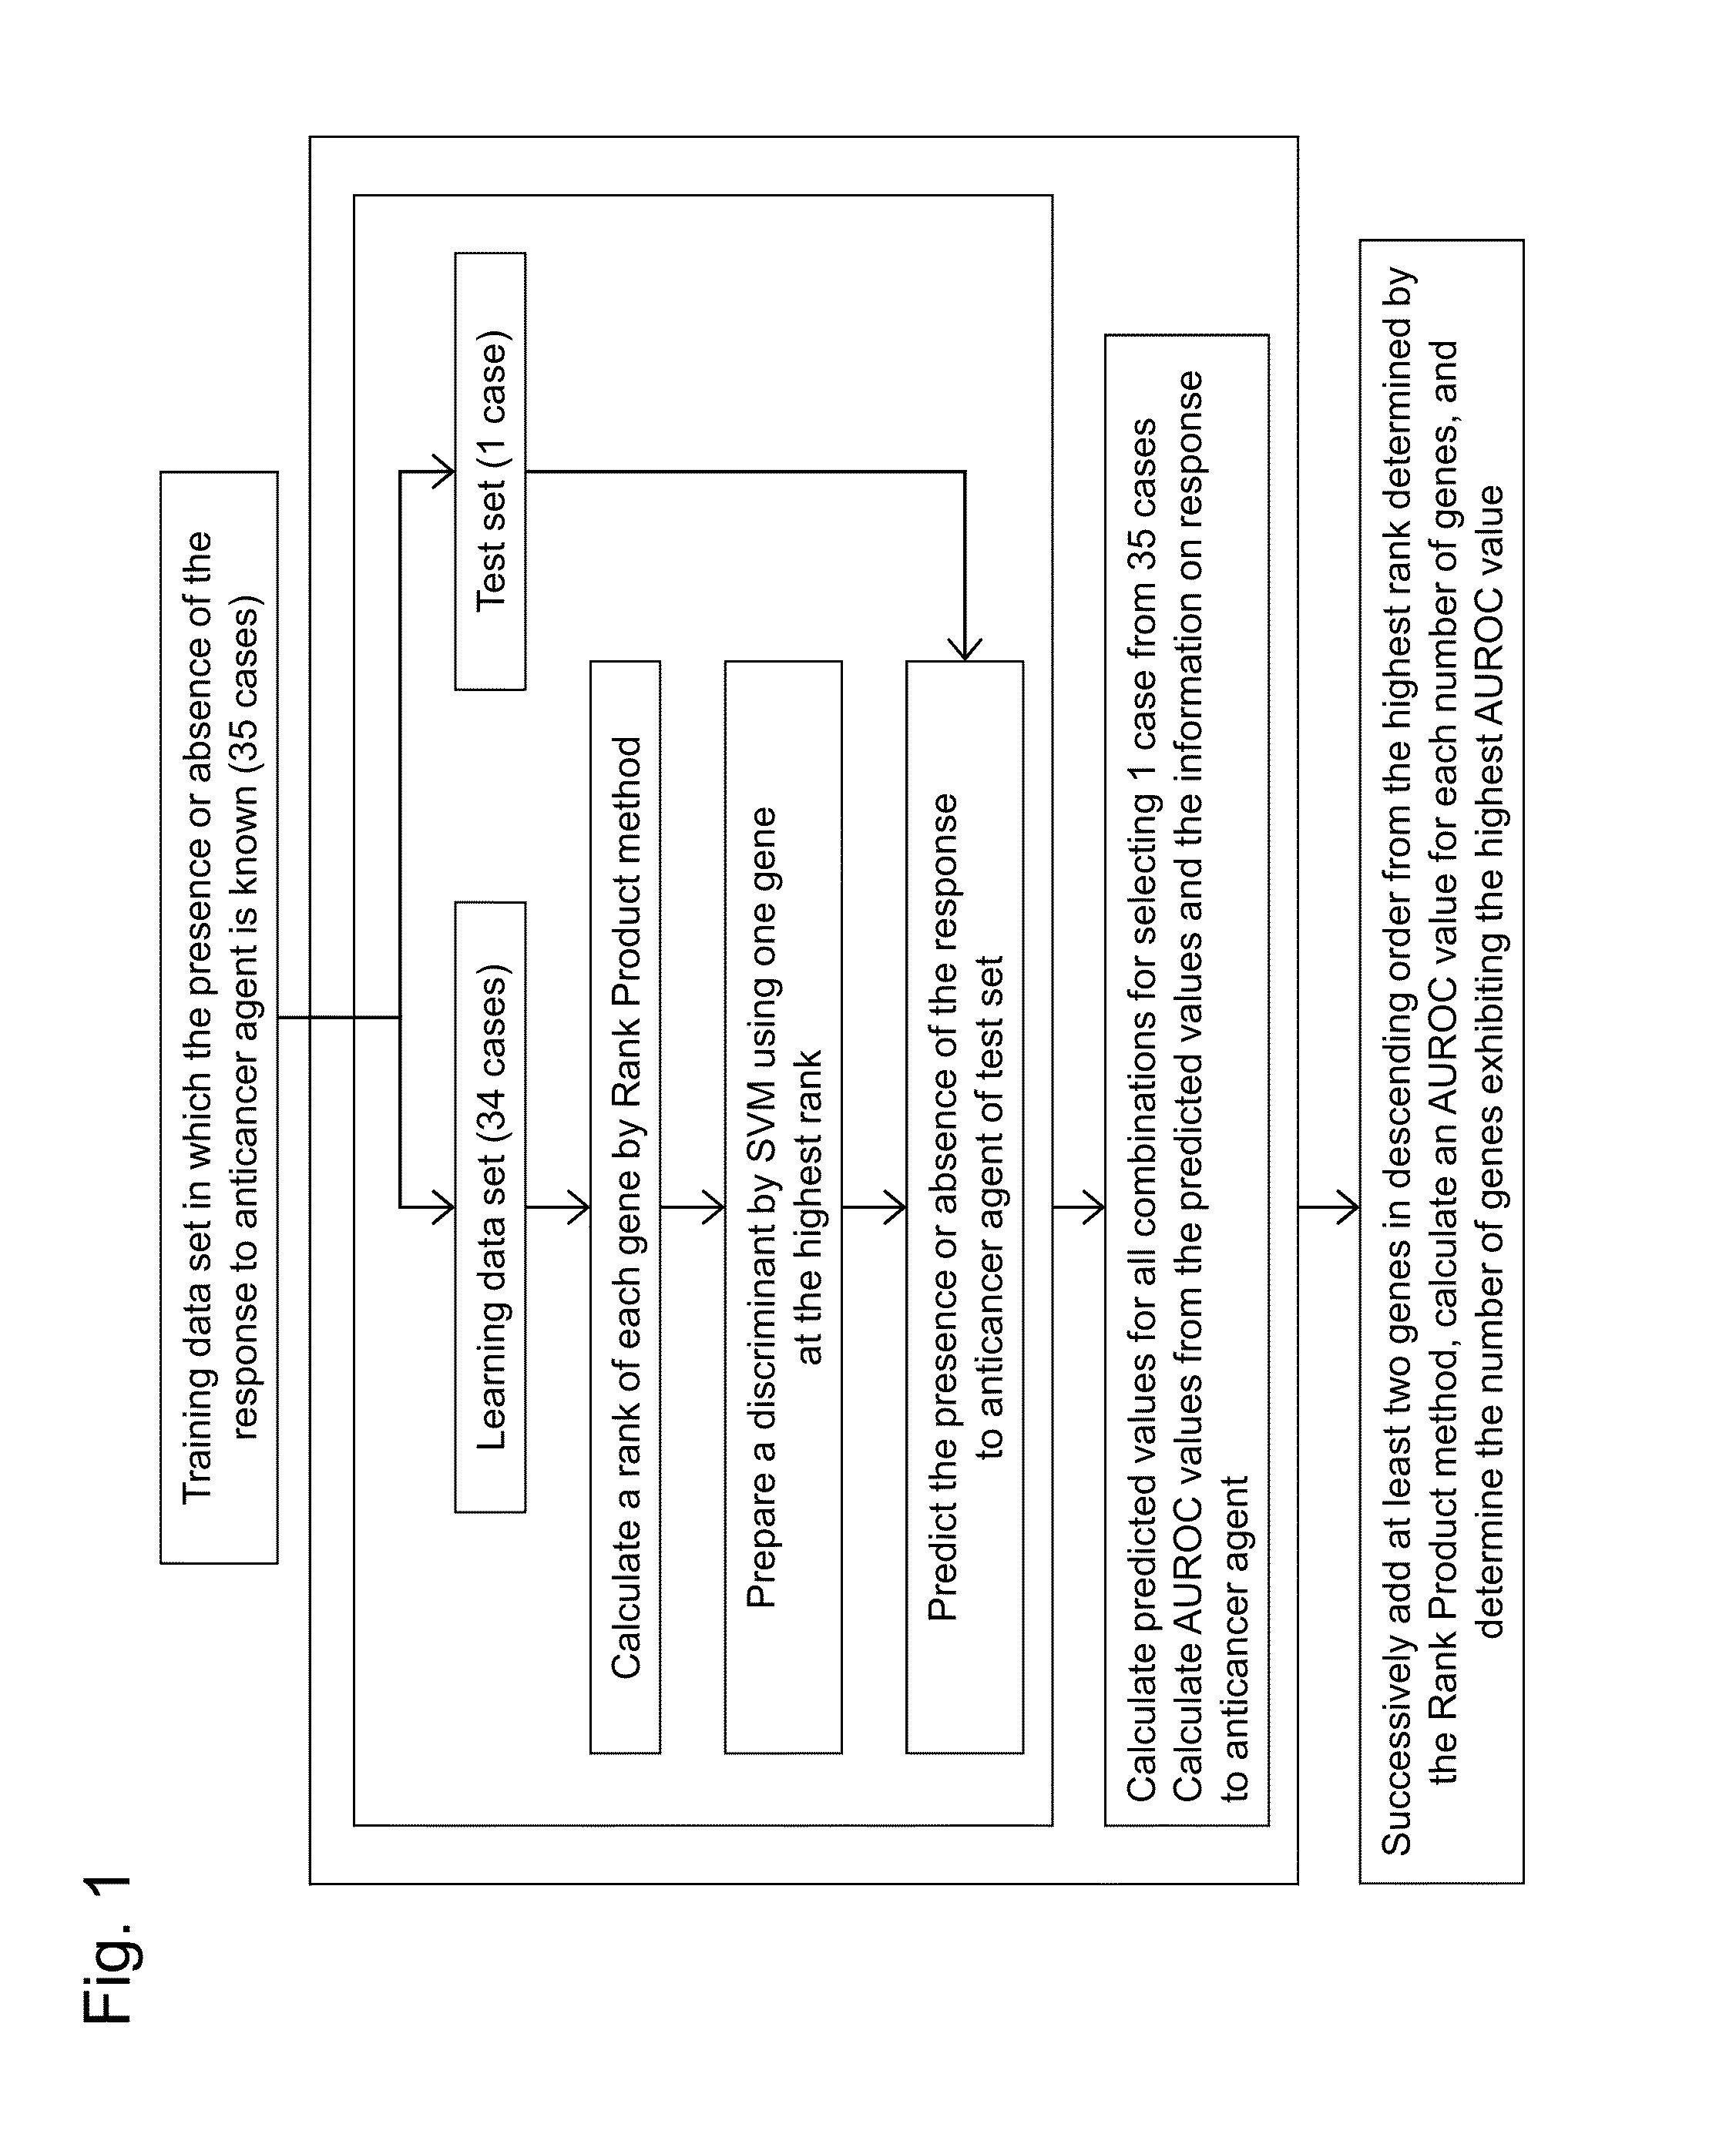 Composition and method for predicting response to trastuzumab therapy in breast cancer patients